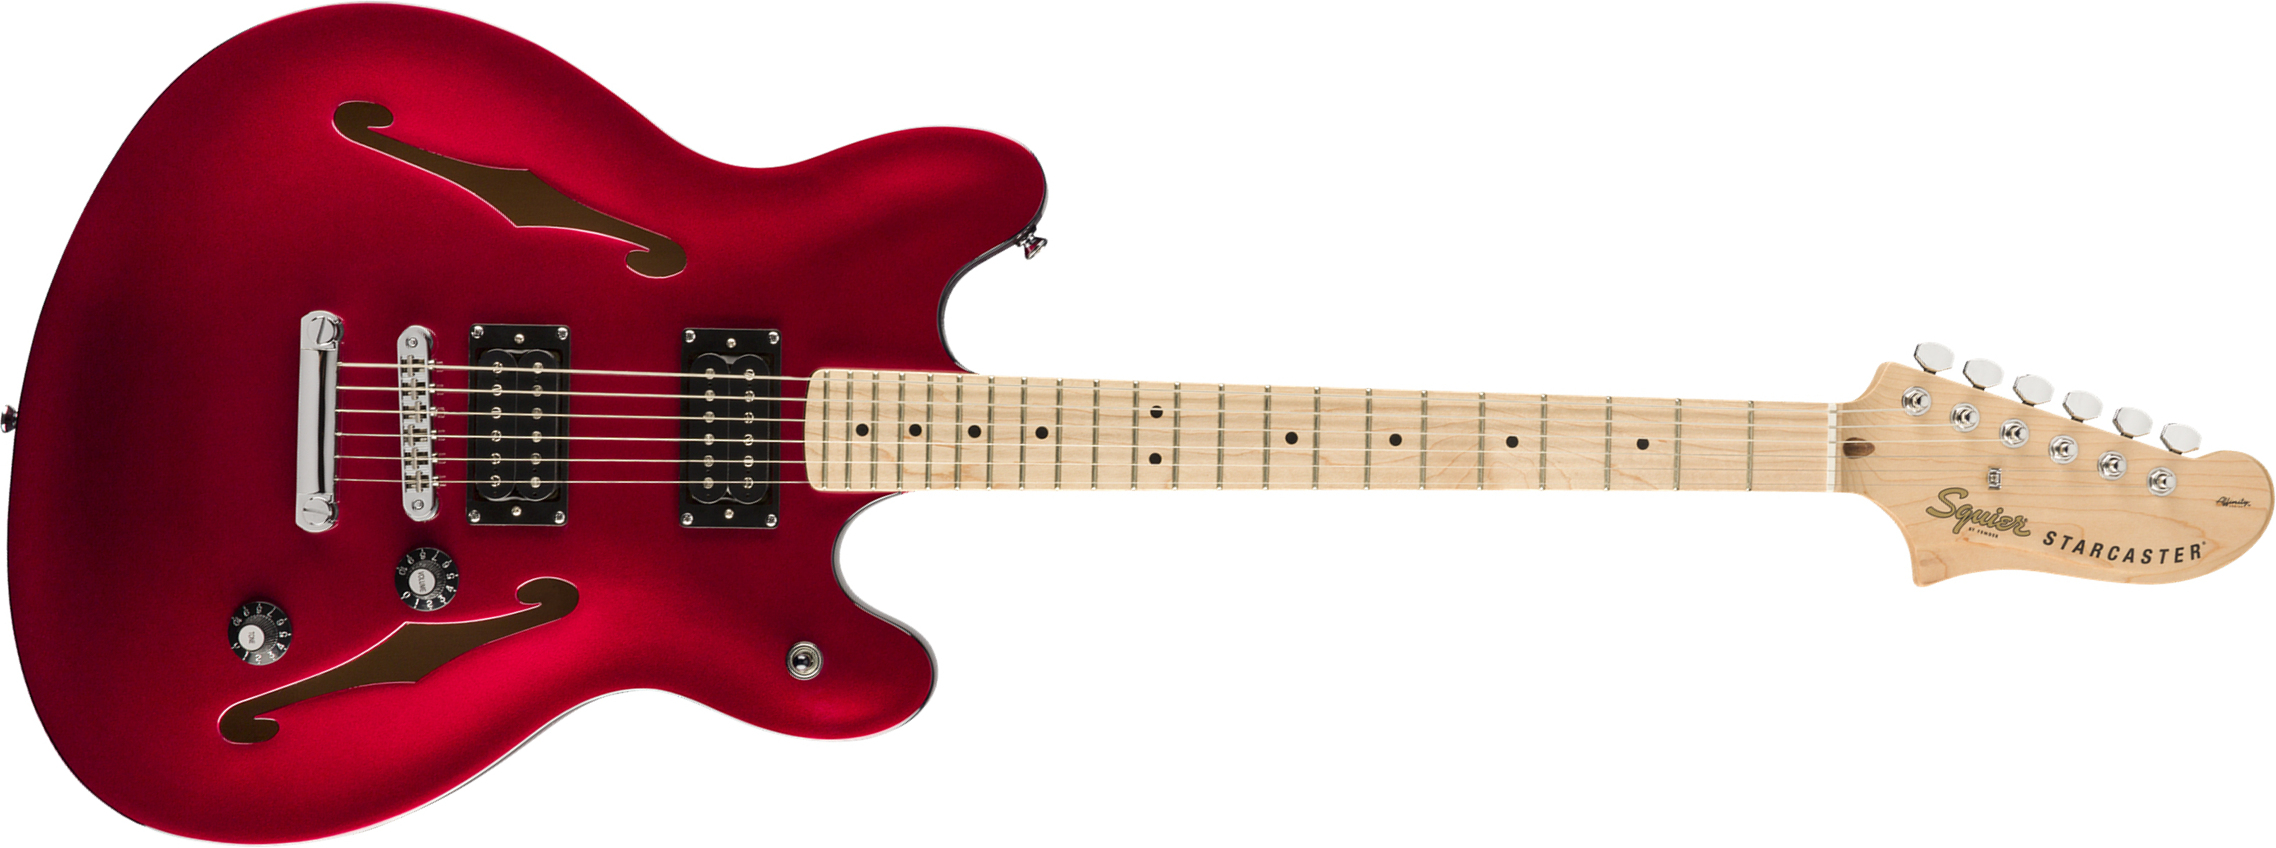 Squier Starcaster Affinity 2019 Hh Ht Mn - Candy Apple Red - Semi hollow elektriche gitaar - Main picture